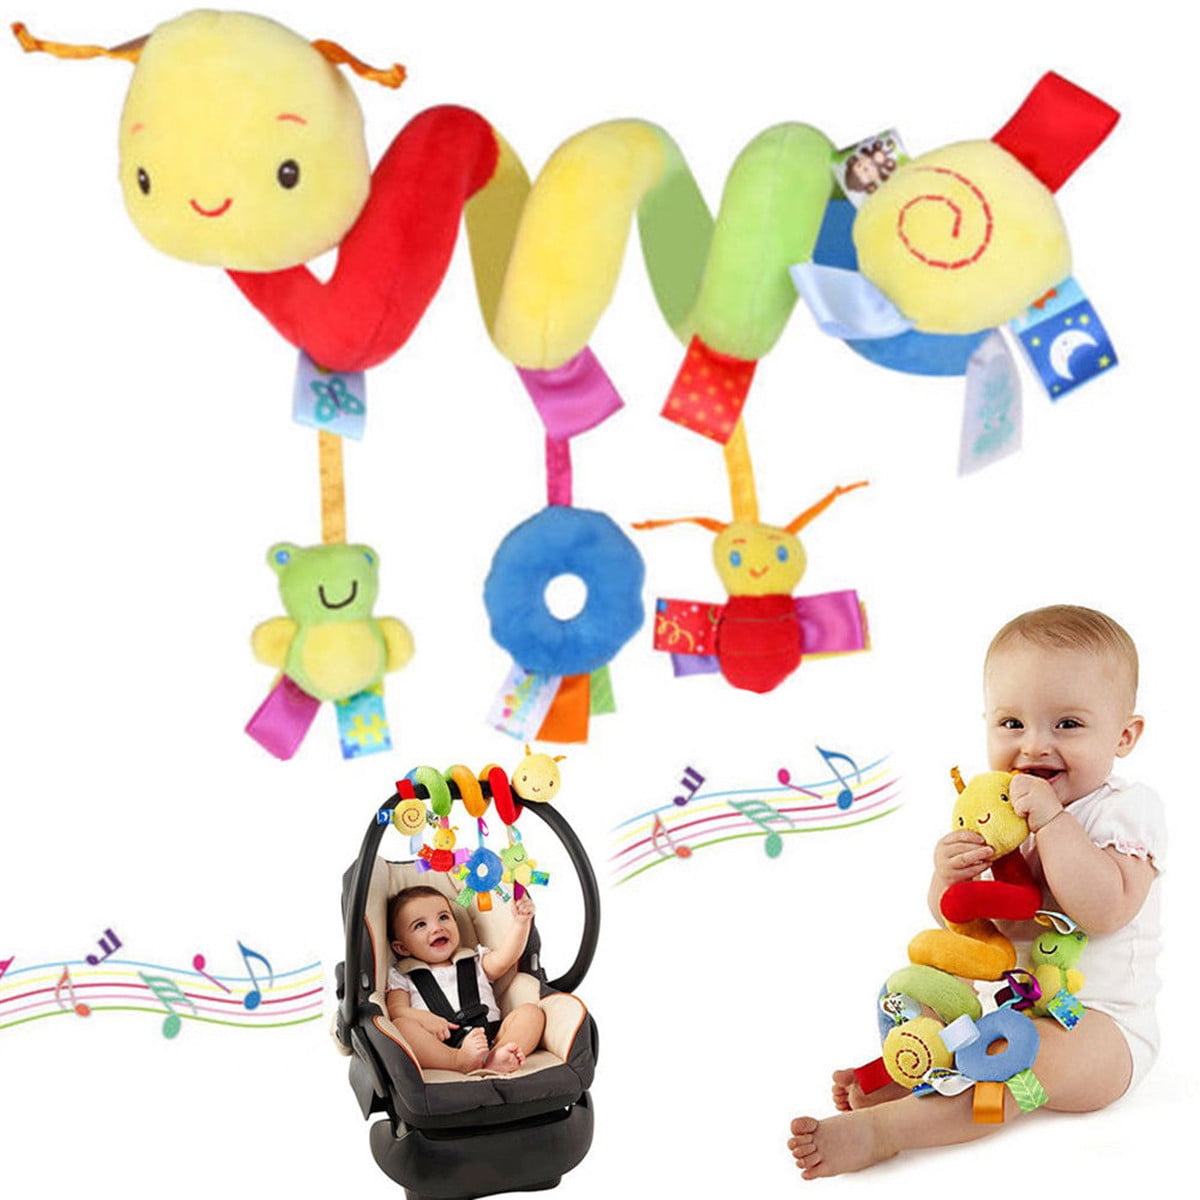 Elephant JERICETOY Baby Car Seat Toys Stroller Toys Crib Toys Infant Activity Spiral Plush Toys Hanging Stroller Toys for Baby Car Seat Stroller Bar Crib Bassinet Mobile with Music Squeaker Rattles 